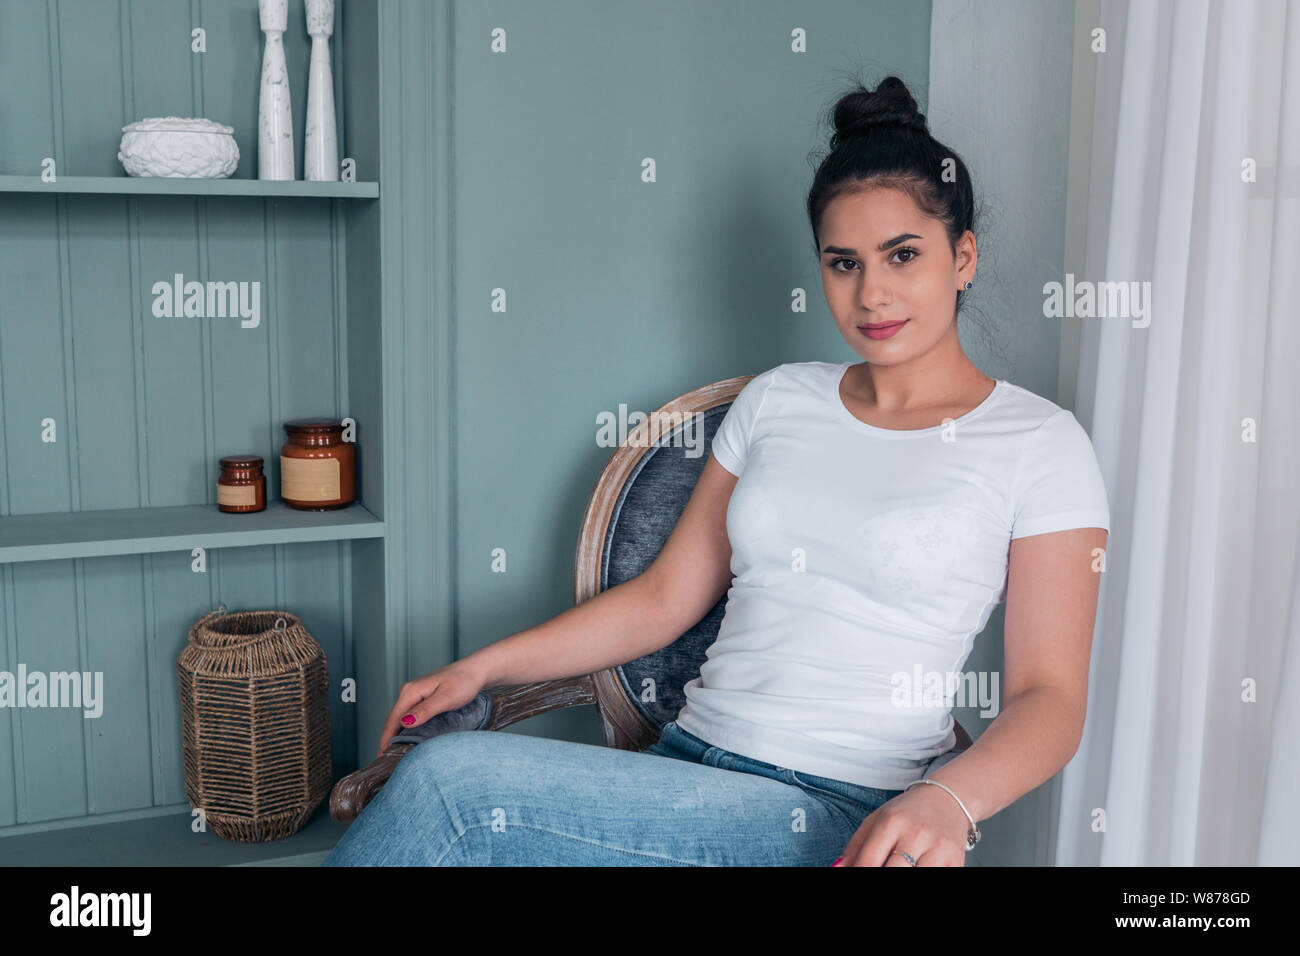 A girl in a white t-shirt sitting in a chair. Women's casual wear Stock Photo